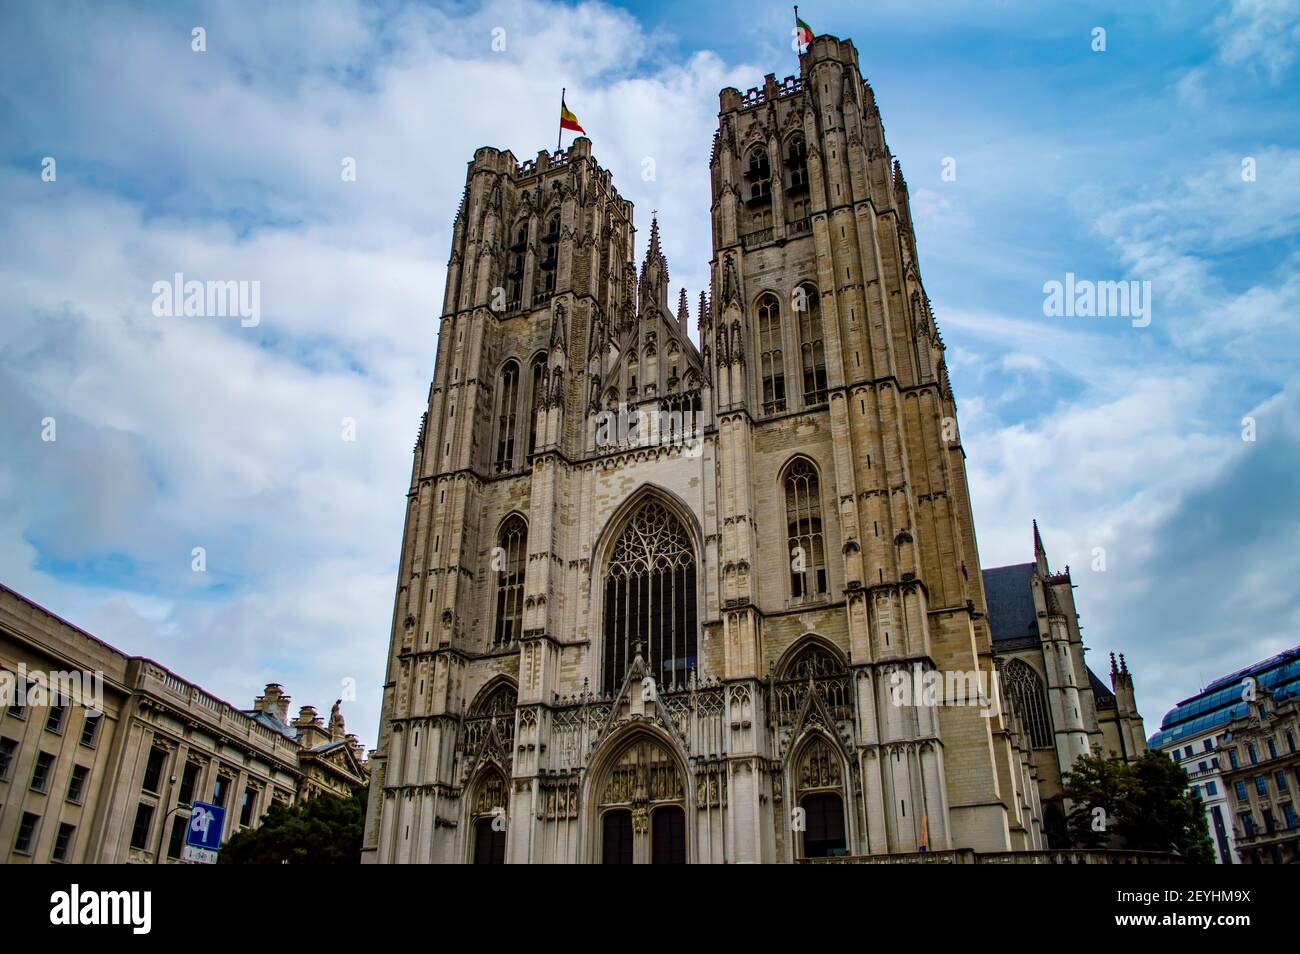 Brussels, Belgium - July 13, 2019: Facade of the Cathedral of Saint Michael and Saint Gudula in Brussels, Belgium Stock Photo